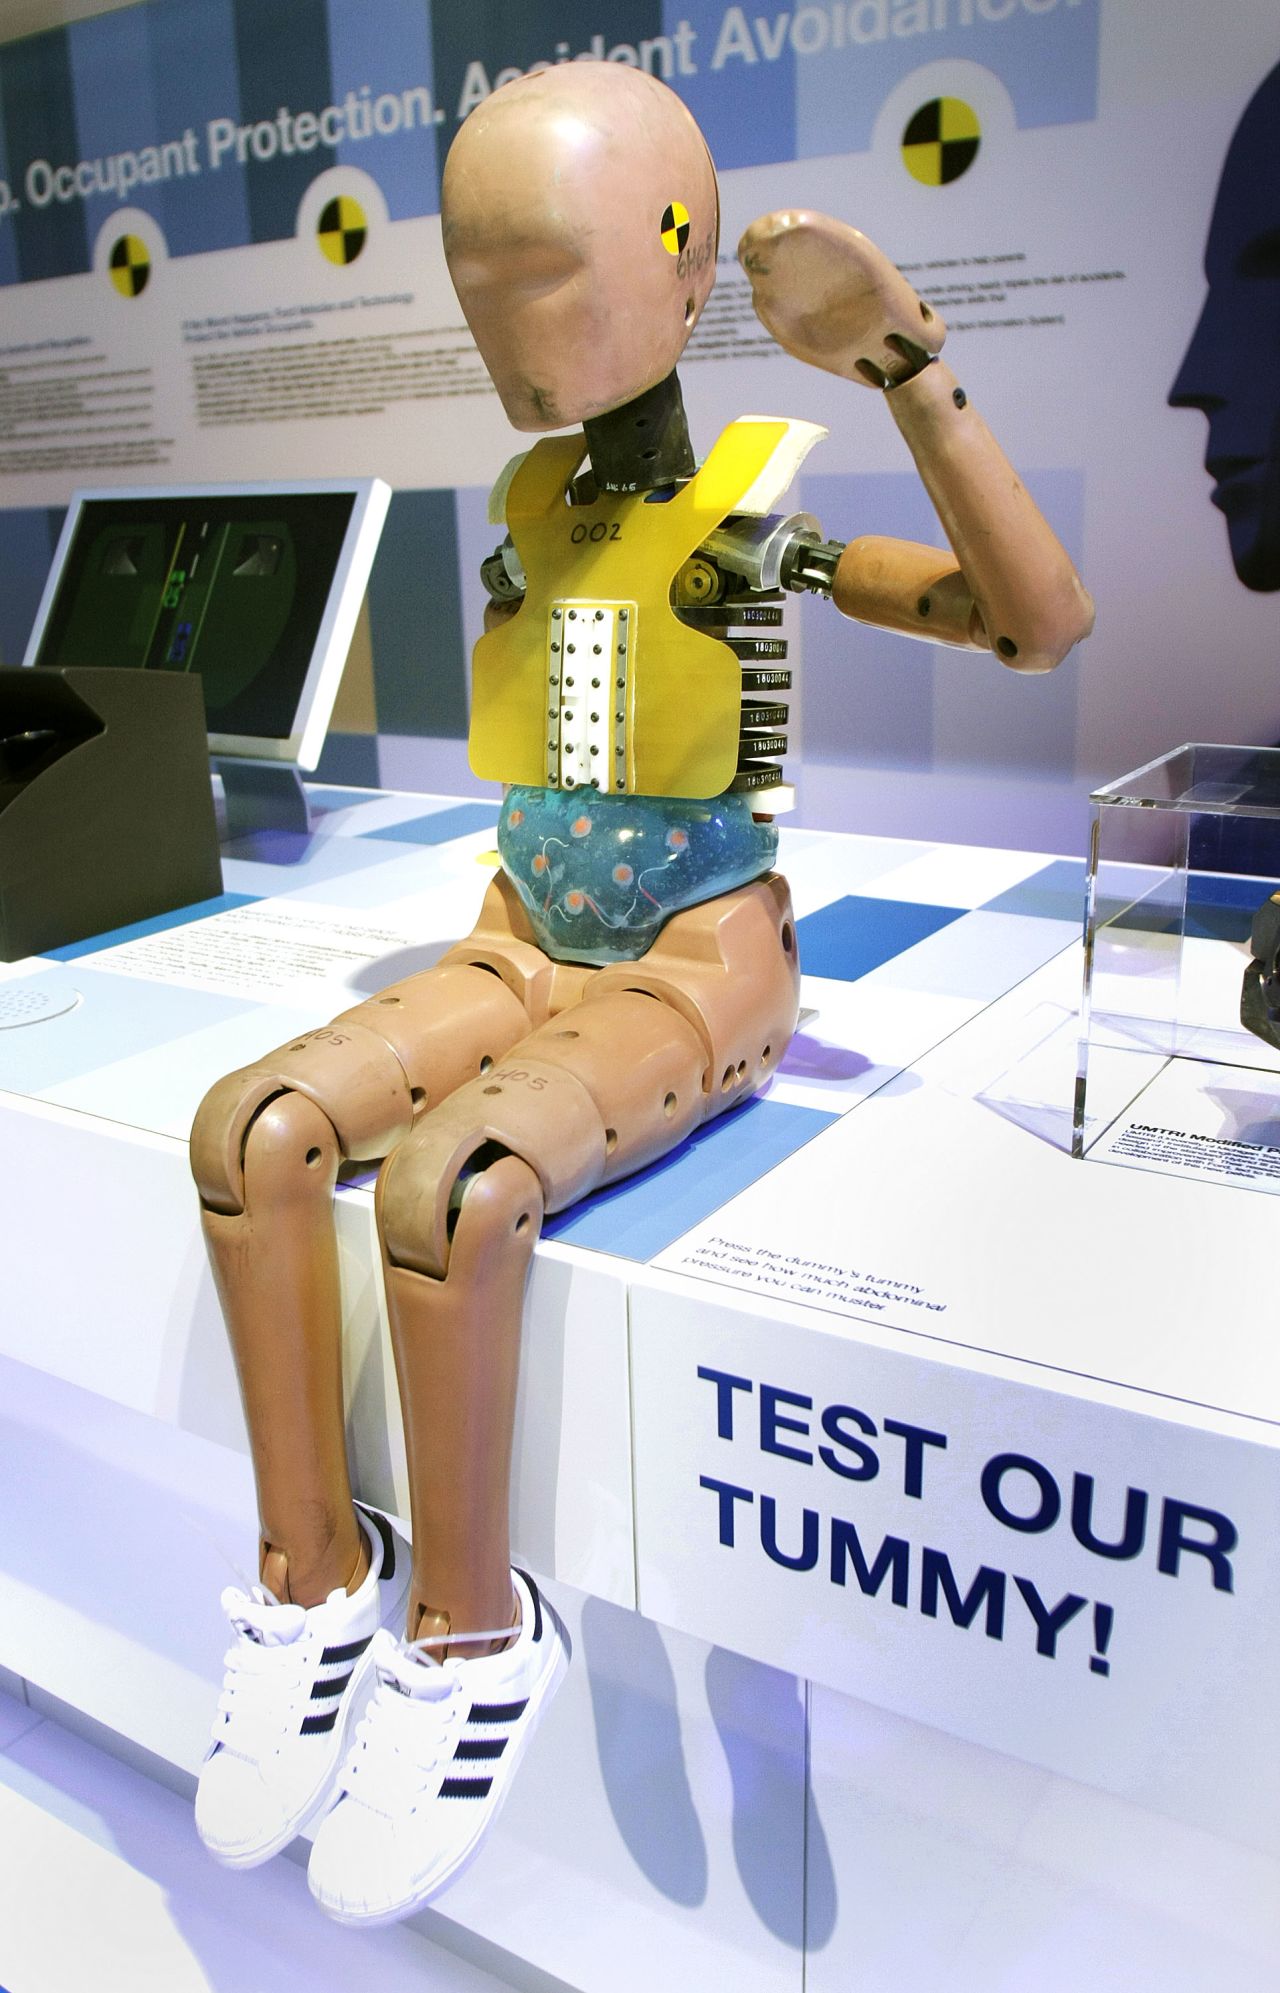 The first crash test dummy was created in 1949 to test ejection seats on aircraft. 